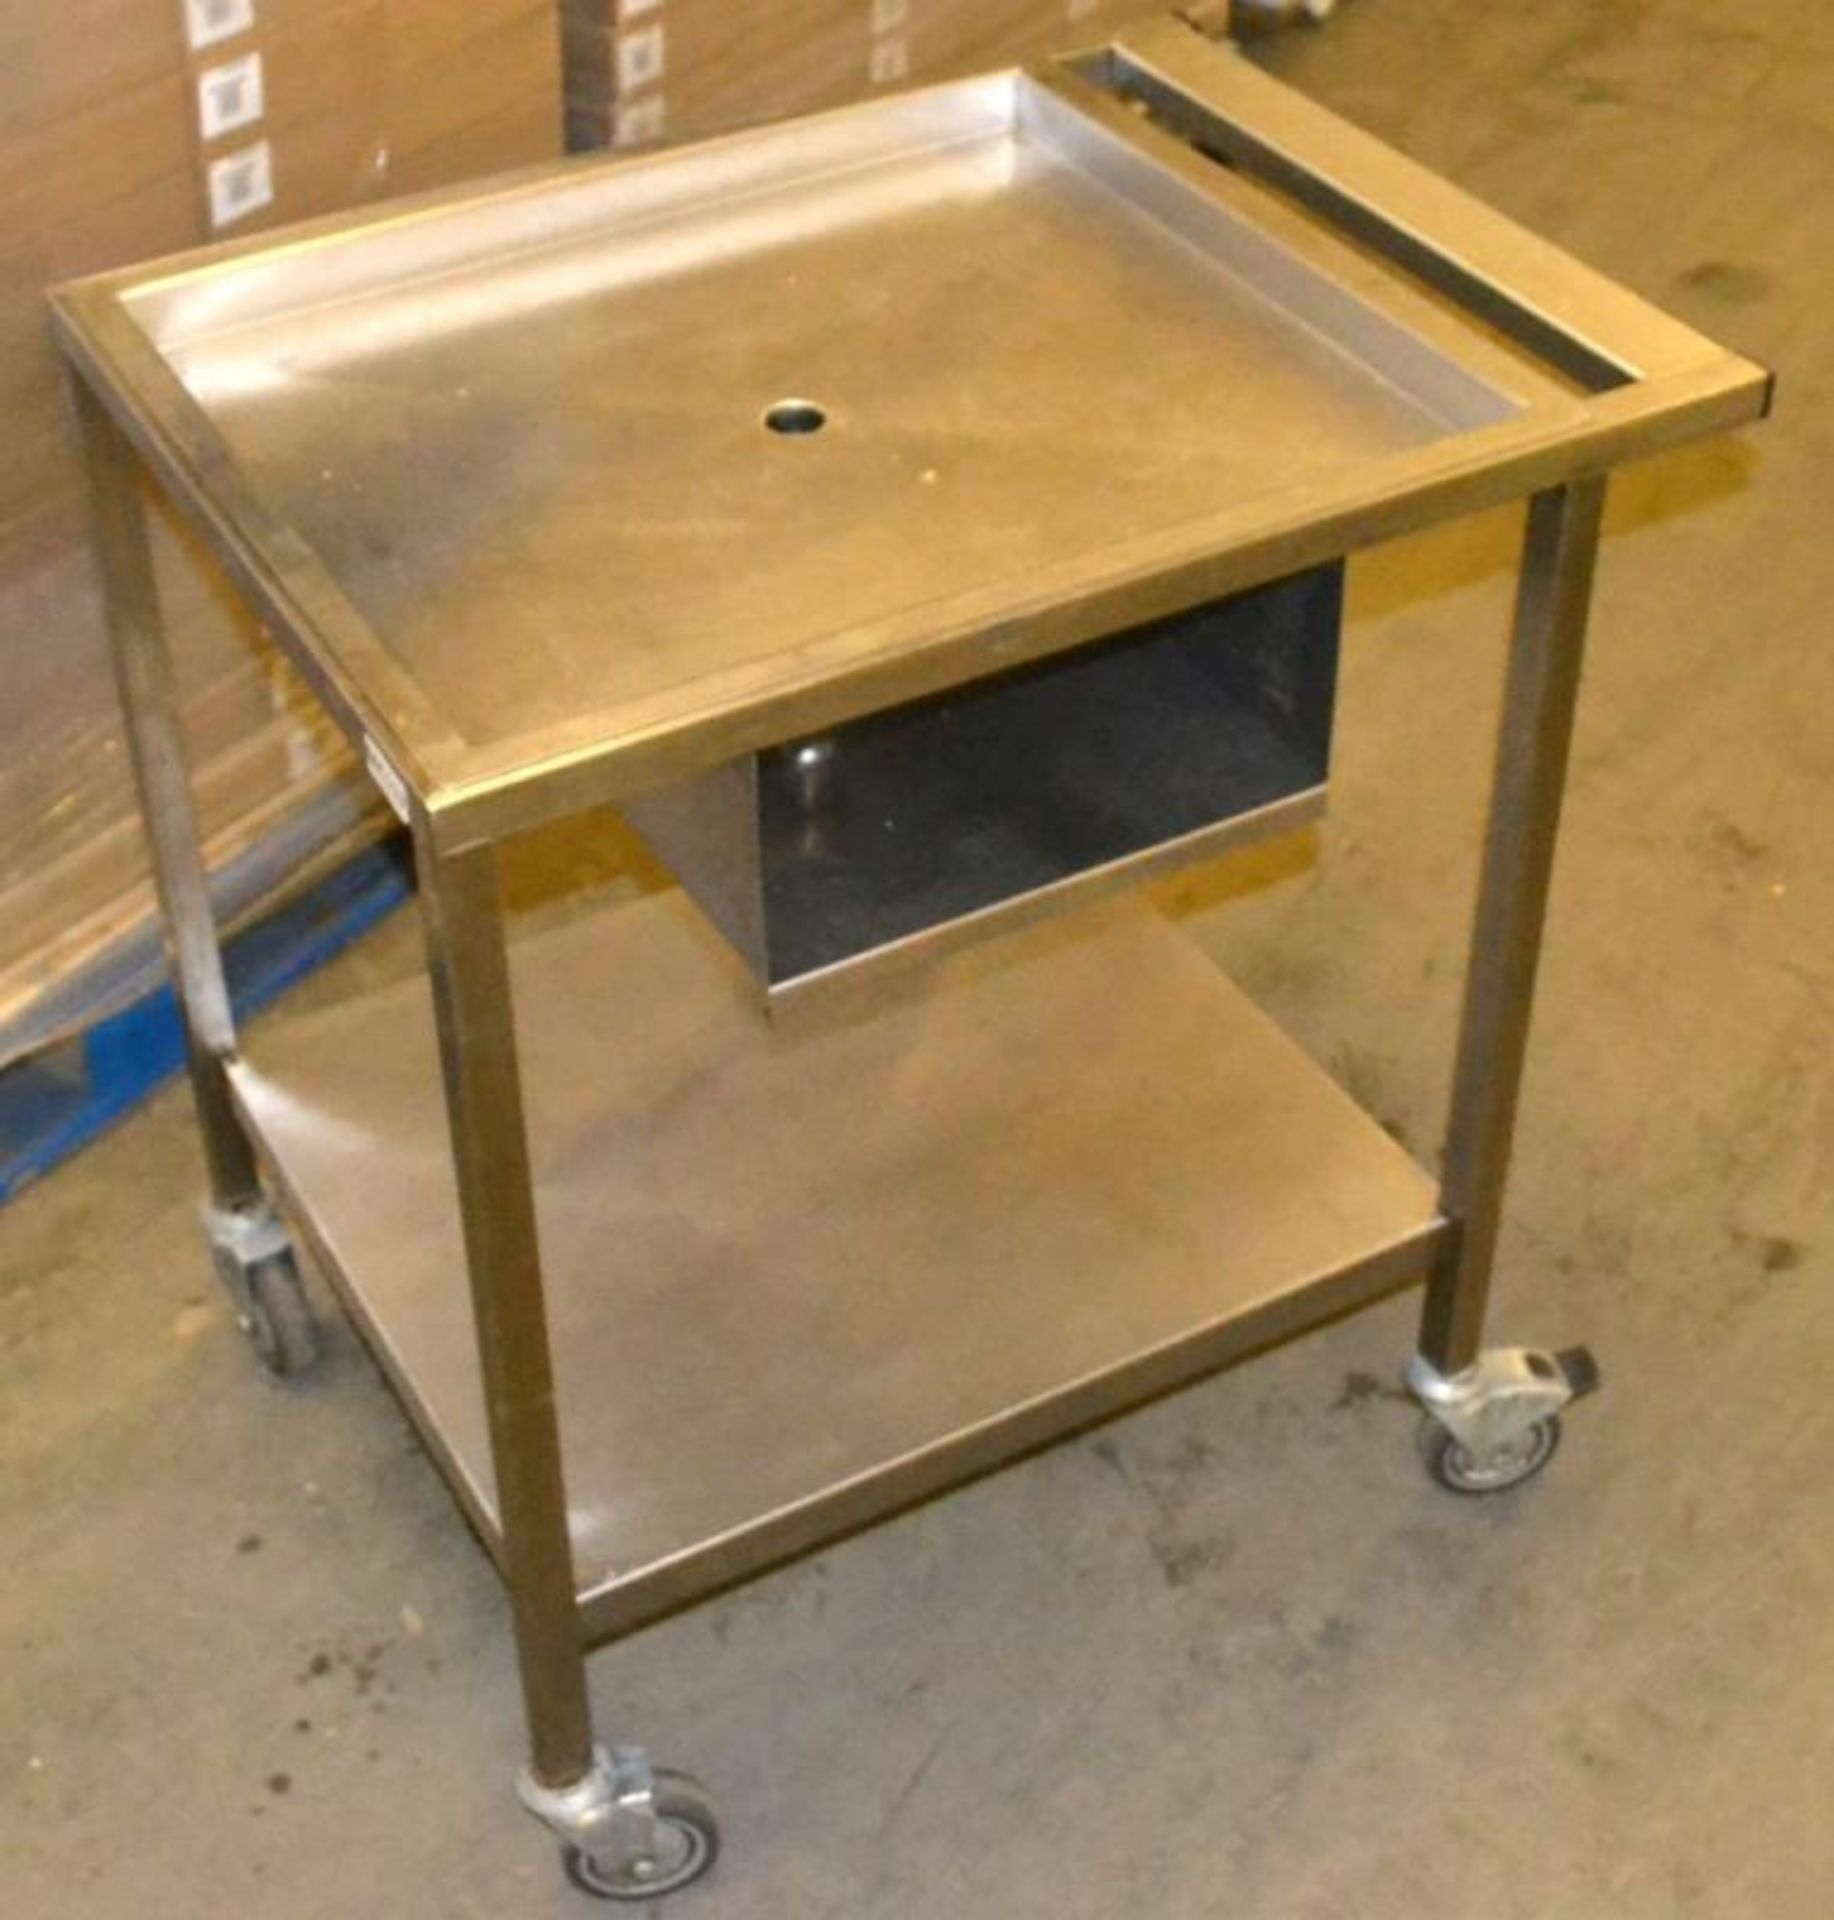 1 x Wheeled Stainless Steel Prep Bench with Drain Hole - Dimensions: 81.5 x 60.5 x 88cm - Ref: MC117 - Image 2 of 7